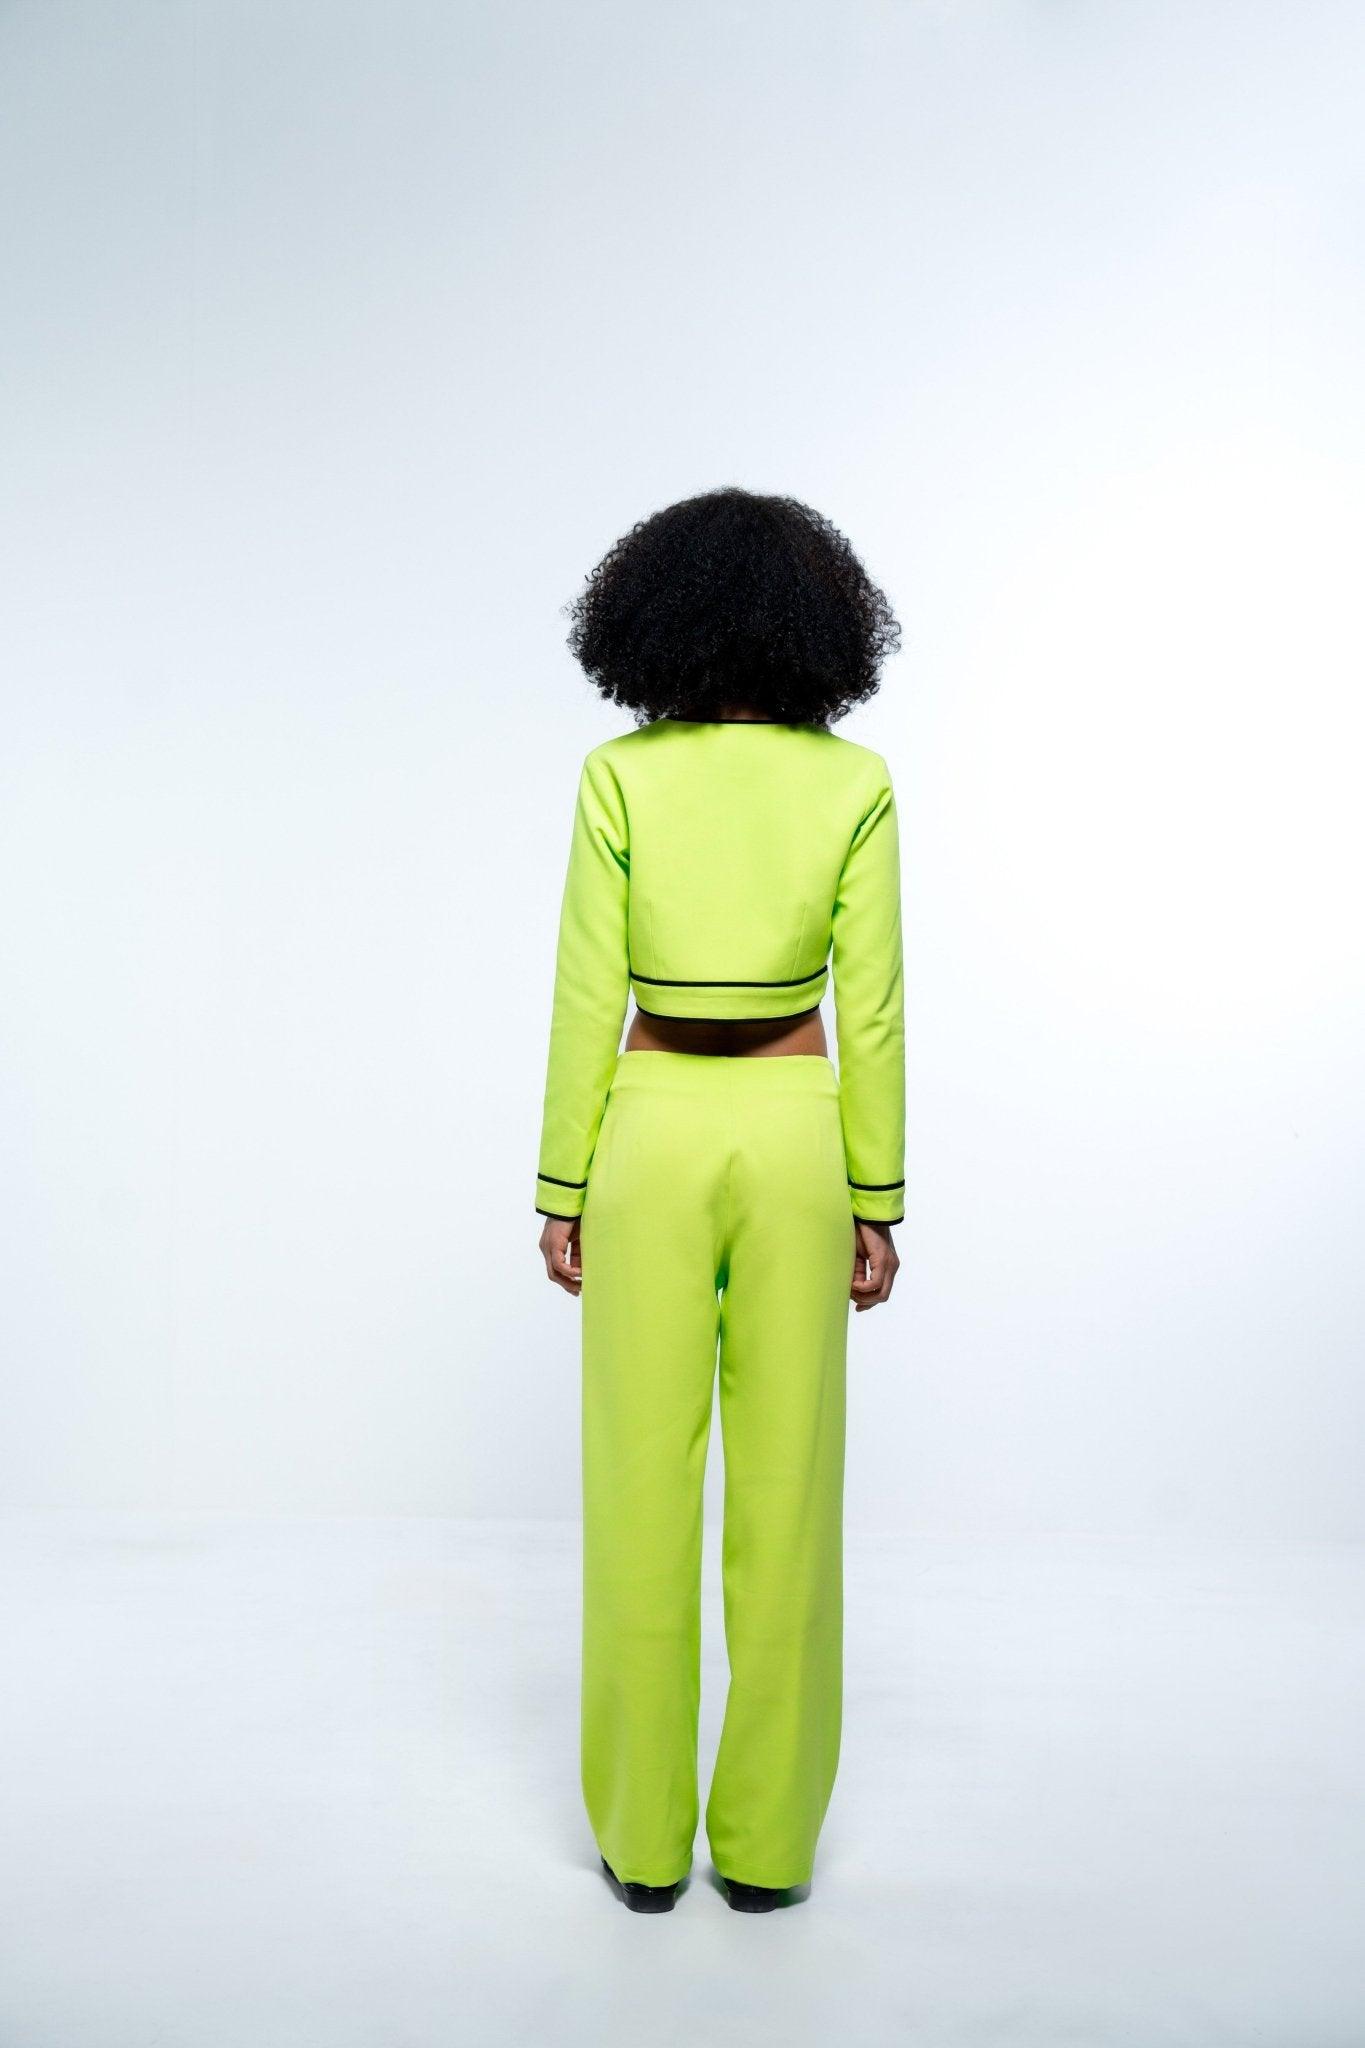 NEON GREEN JACKET WITH BLACK COLORBLOCK DETAIL - Sotbella